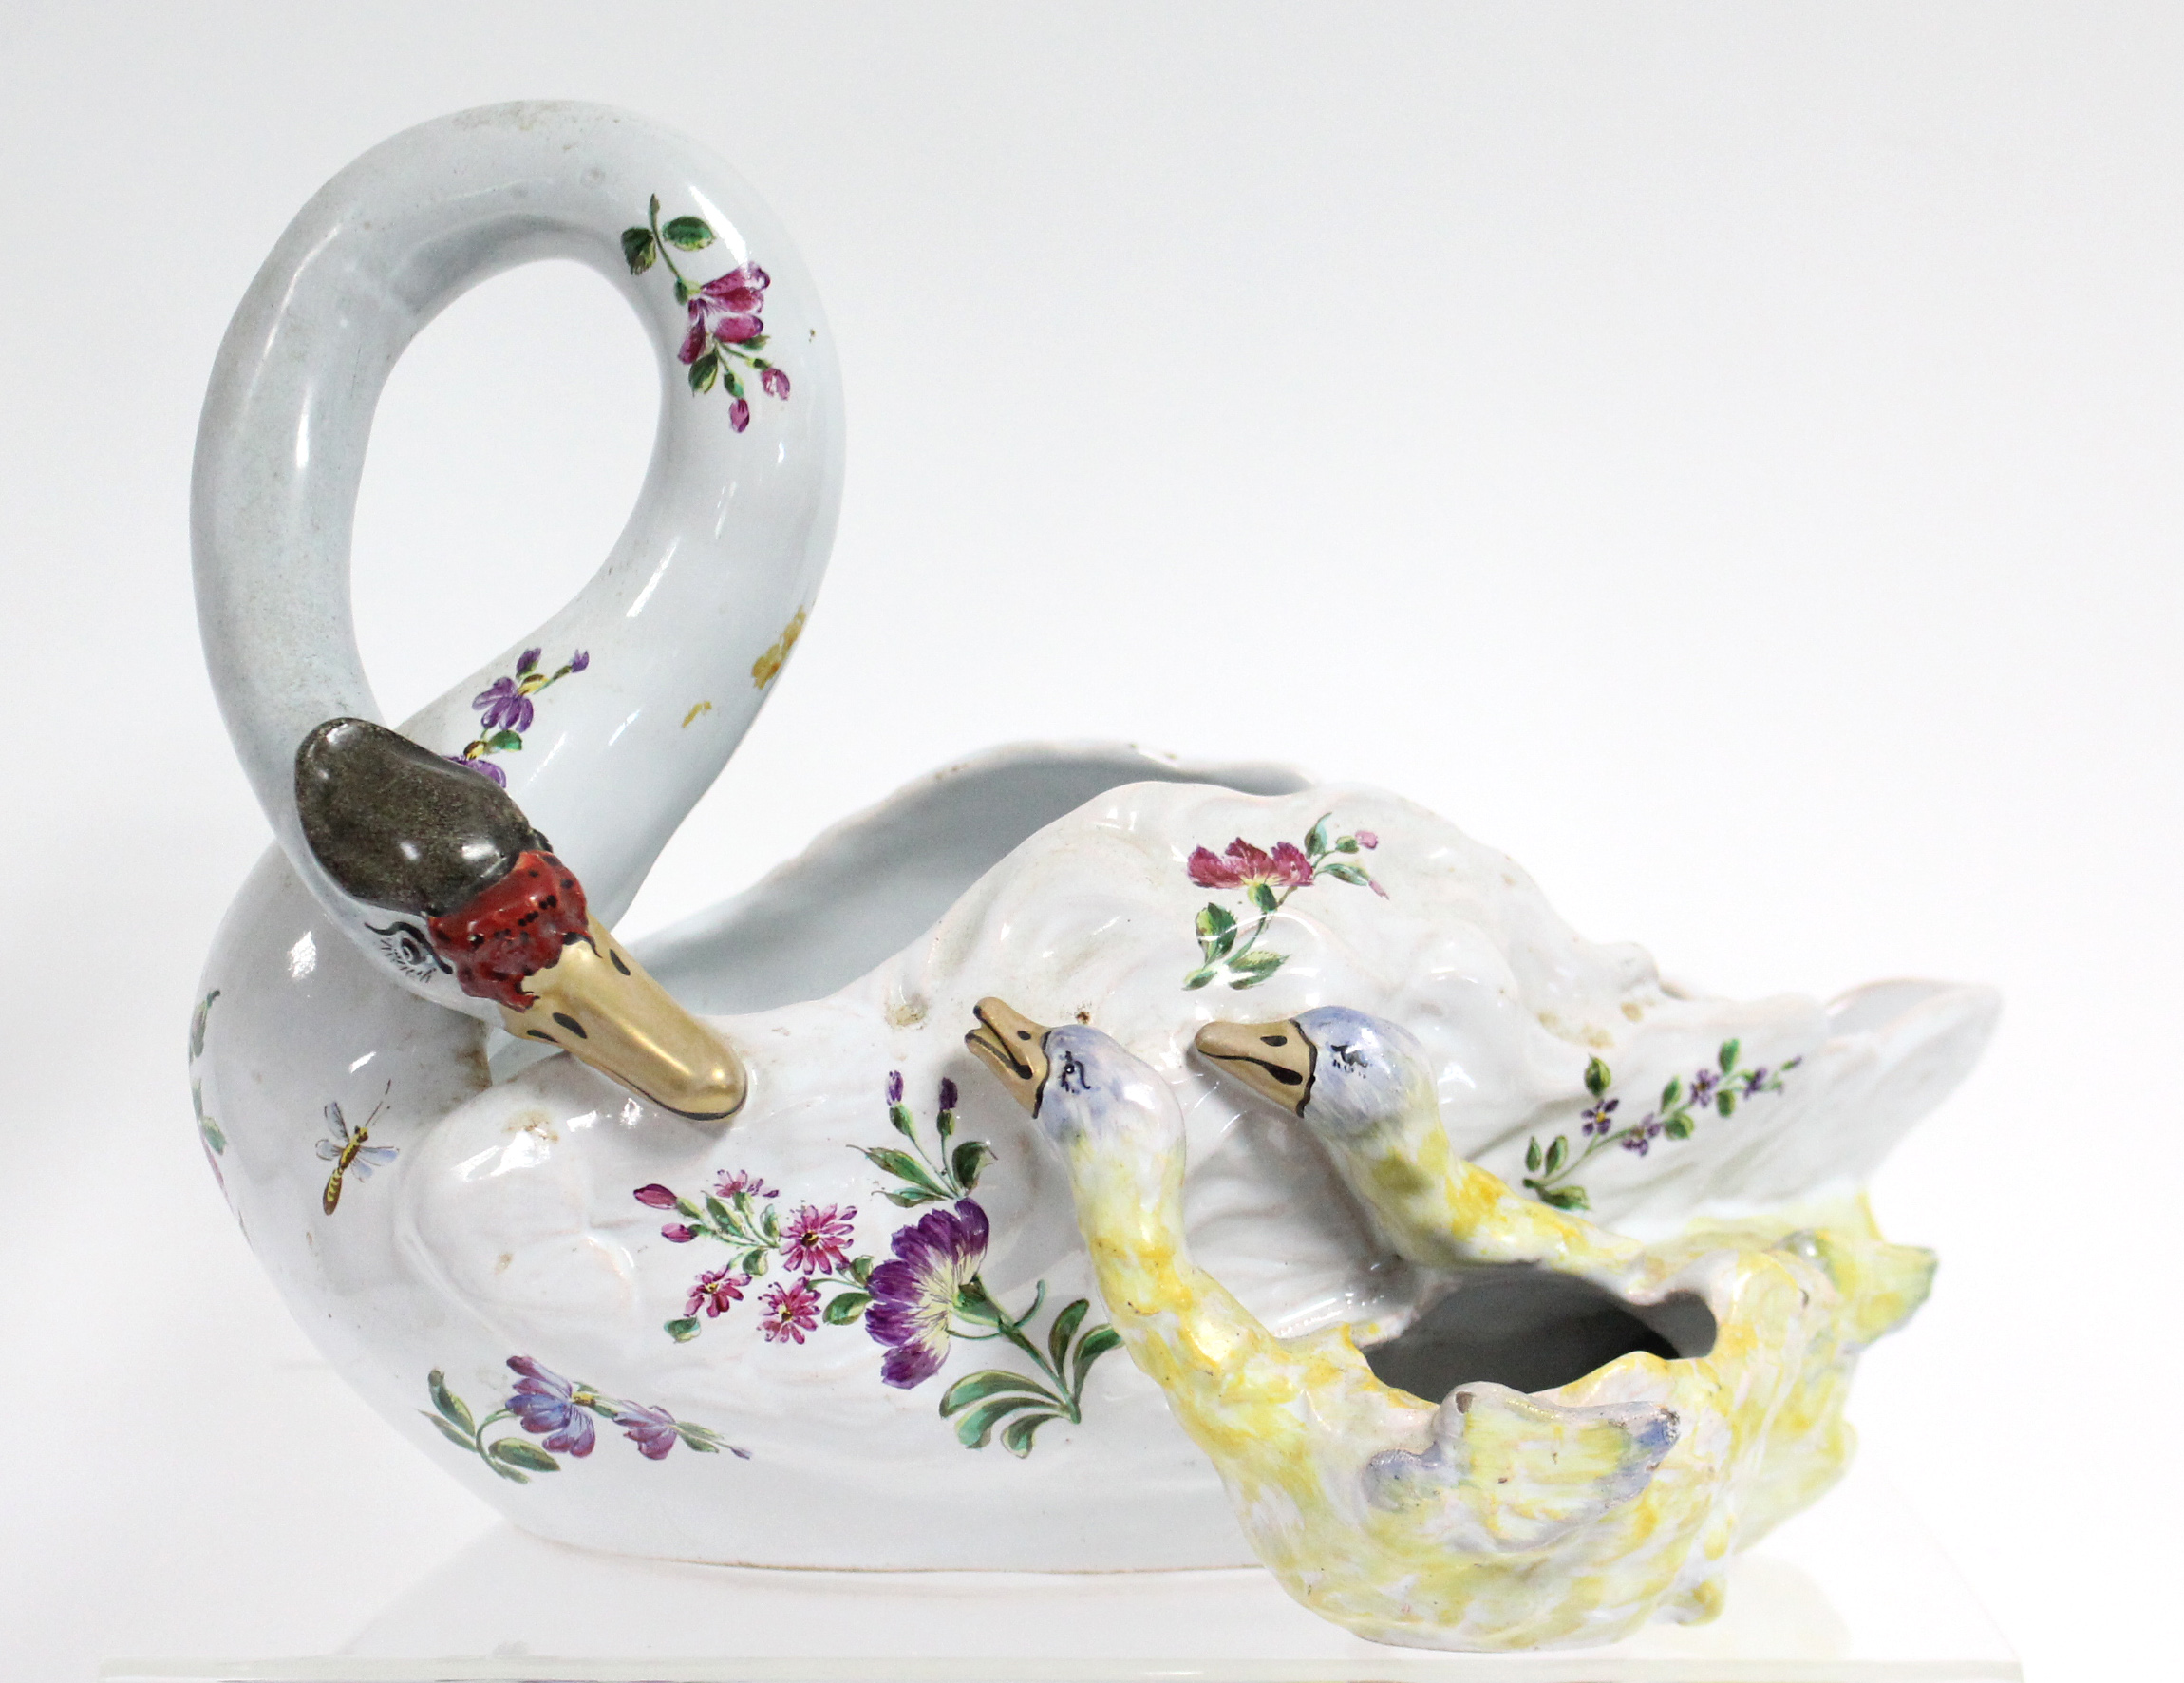 A GALLÉ FAIENCE BOWL IN THE FORM OF A SWAN, its neck looped downwards toward two cygnets at her